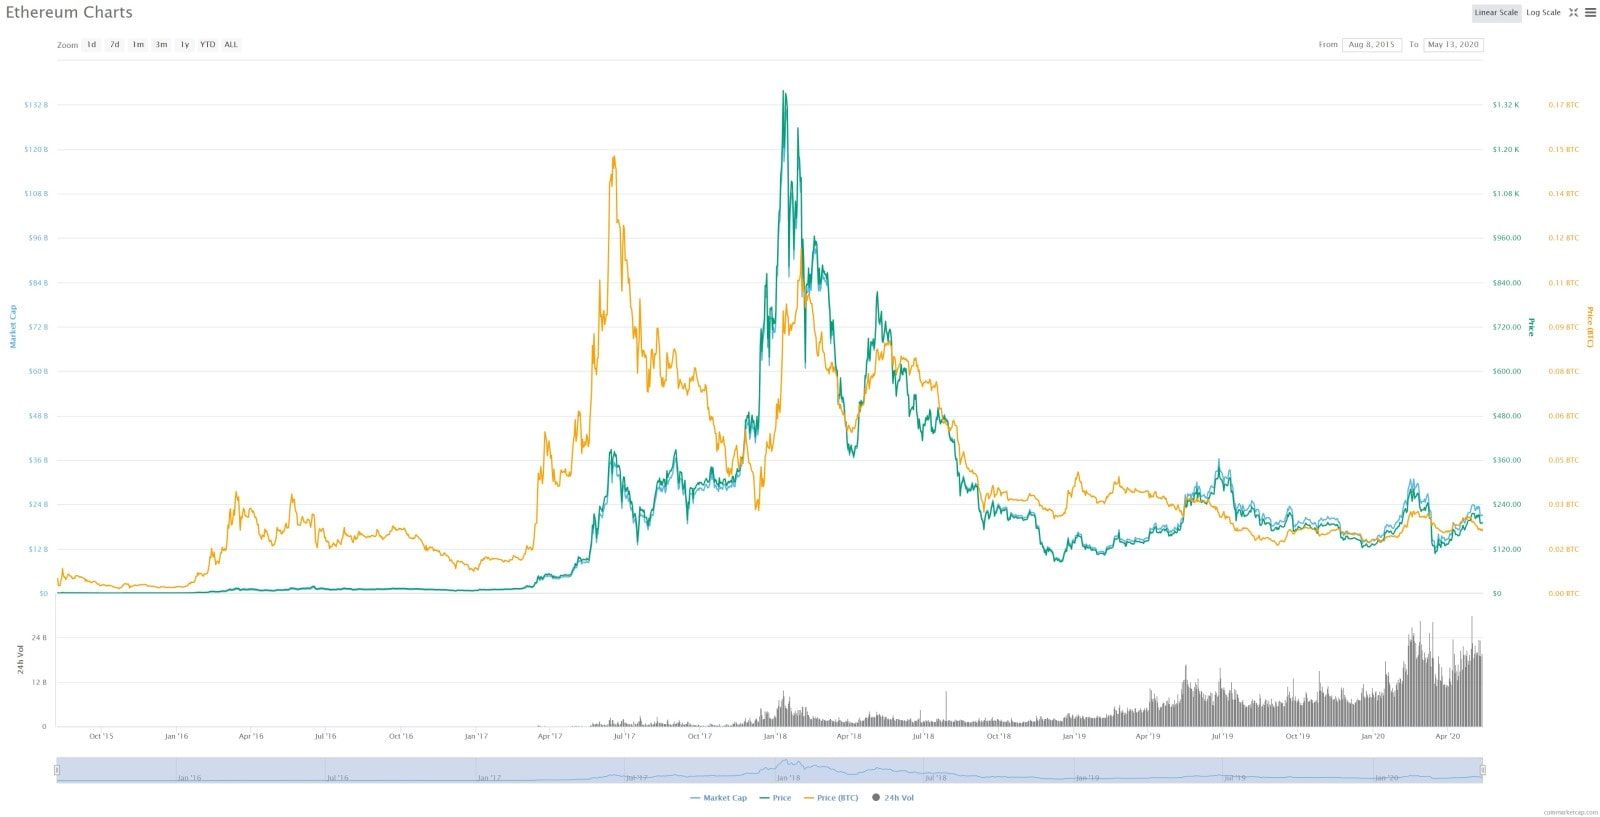 ETH price history in USD and BTC